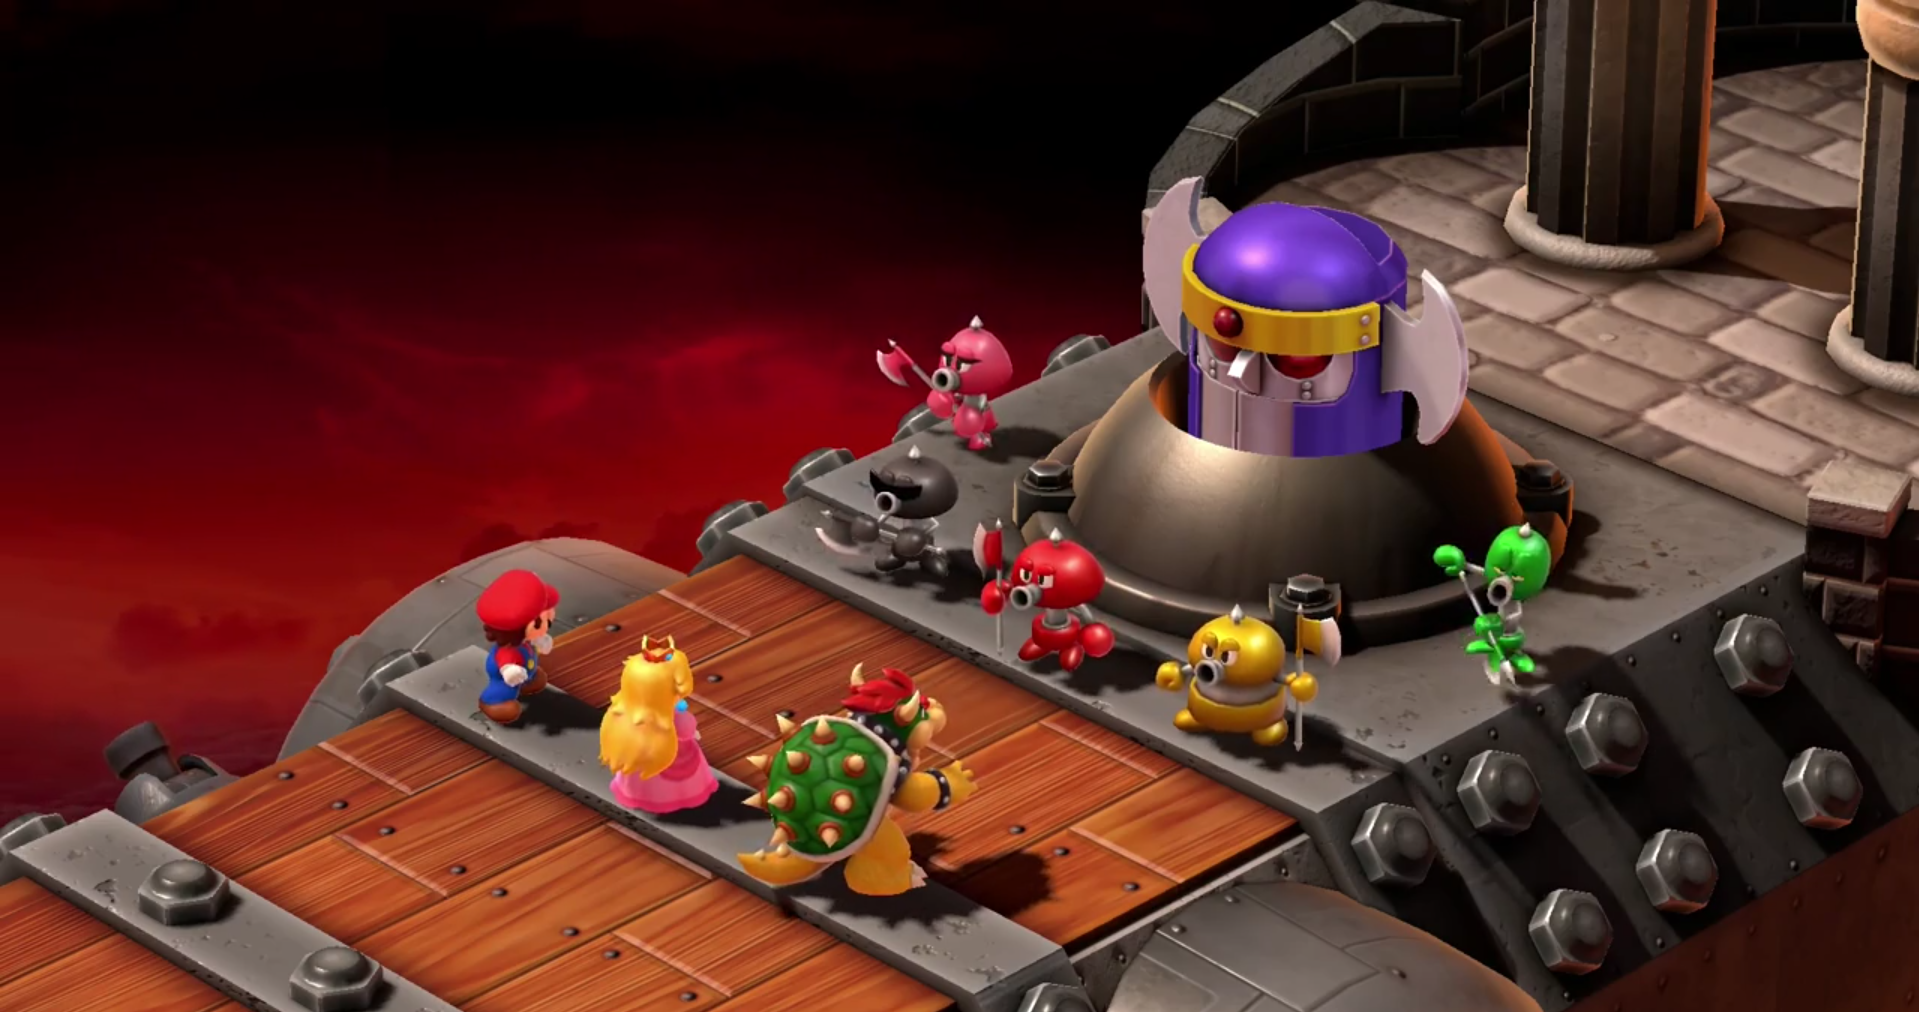 Mario, Bowser, and Peach taking on the Axem Rangers in Super Mario RPG.